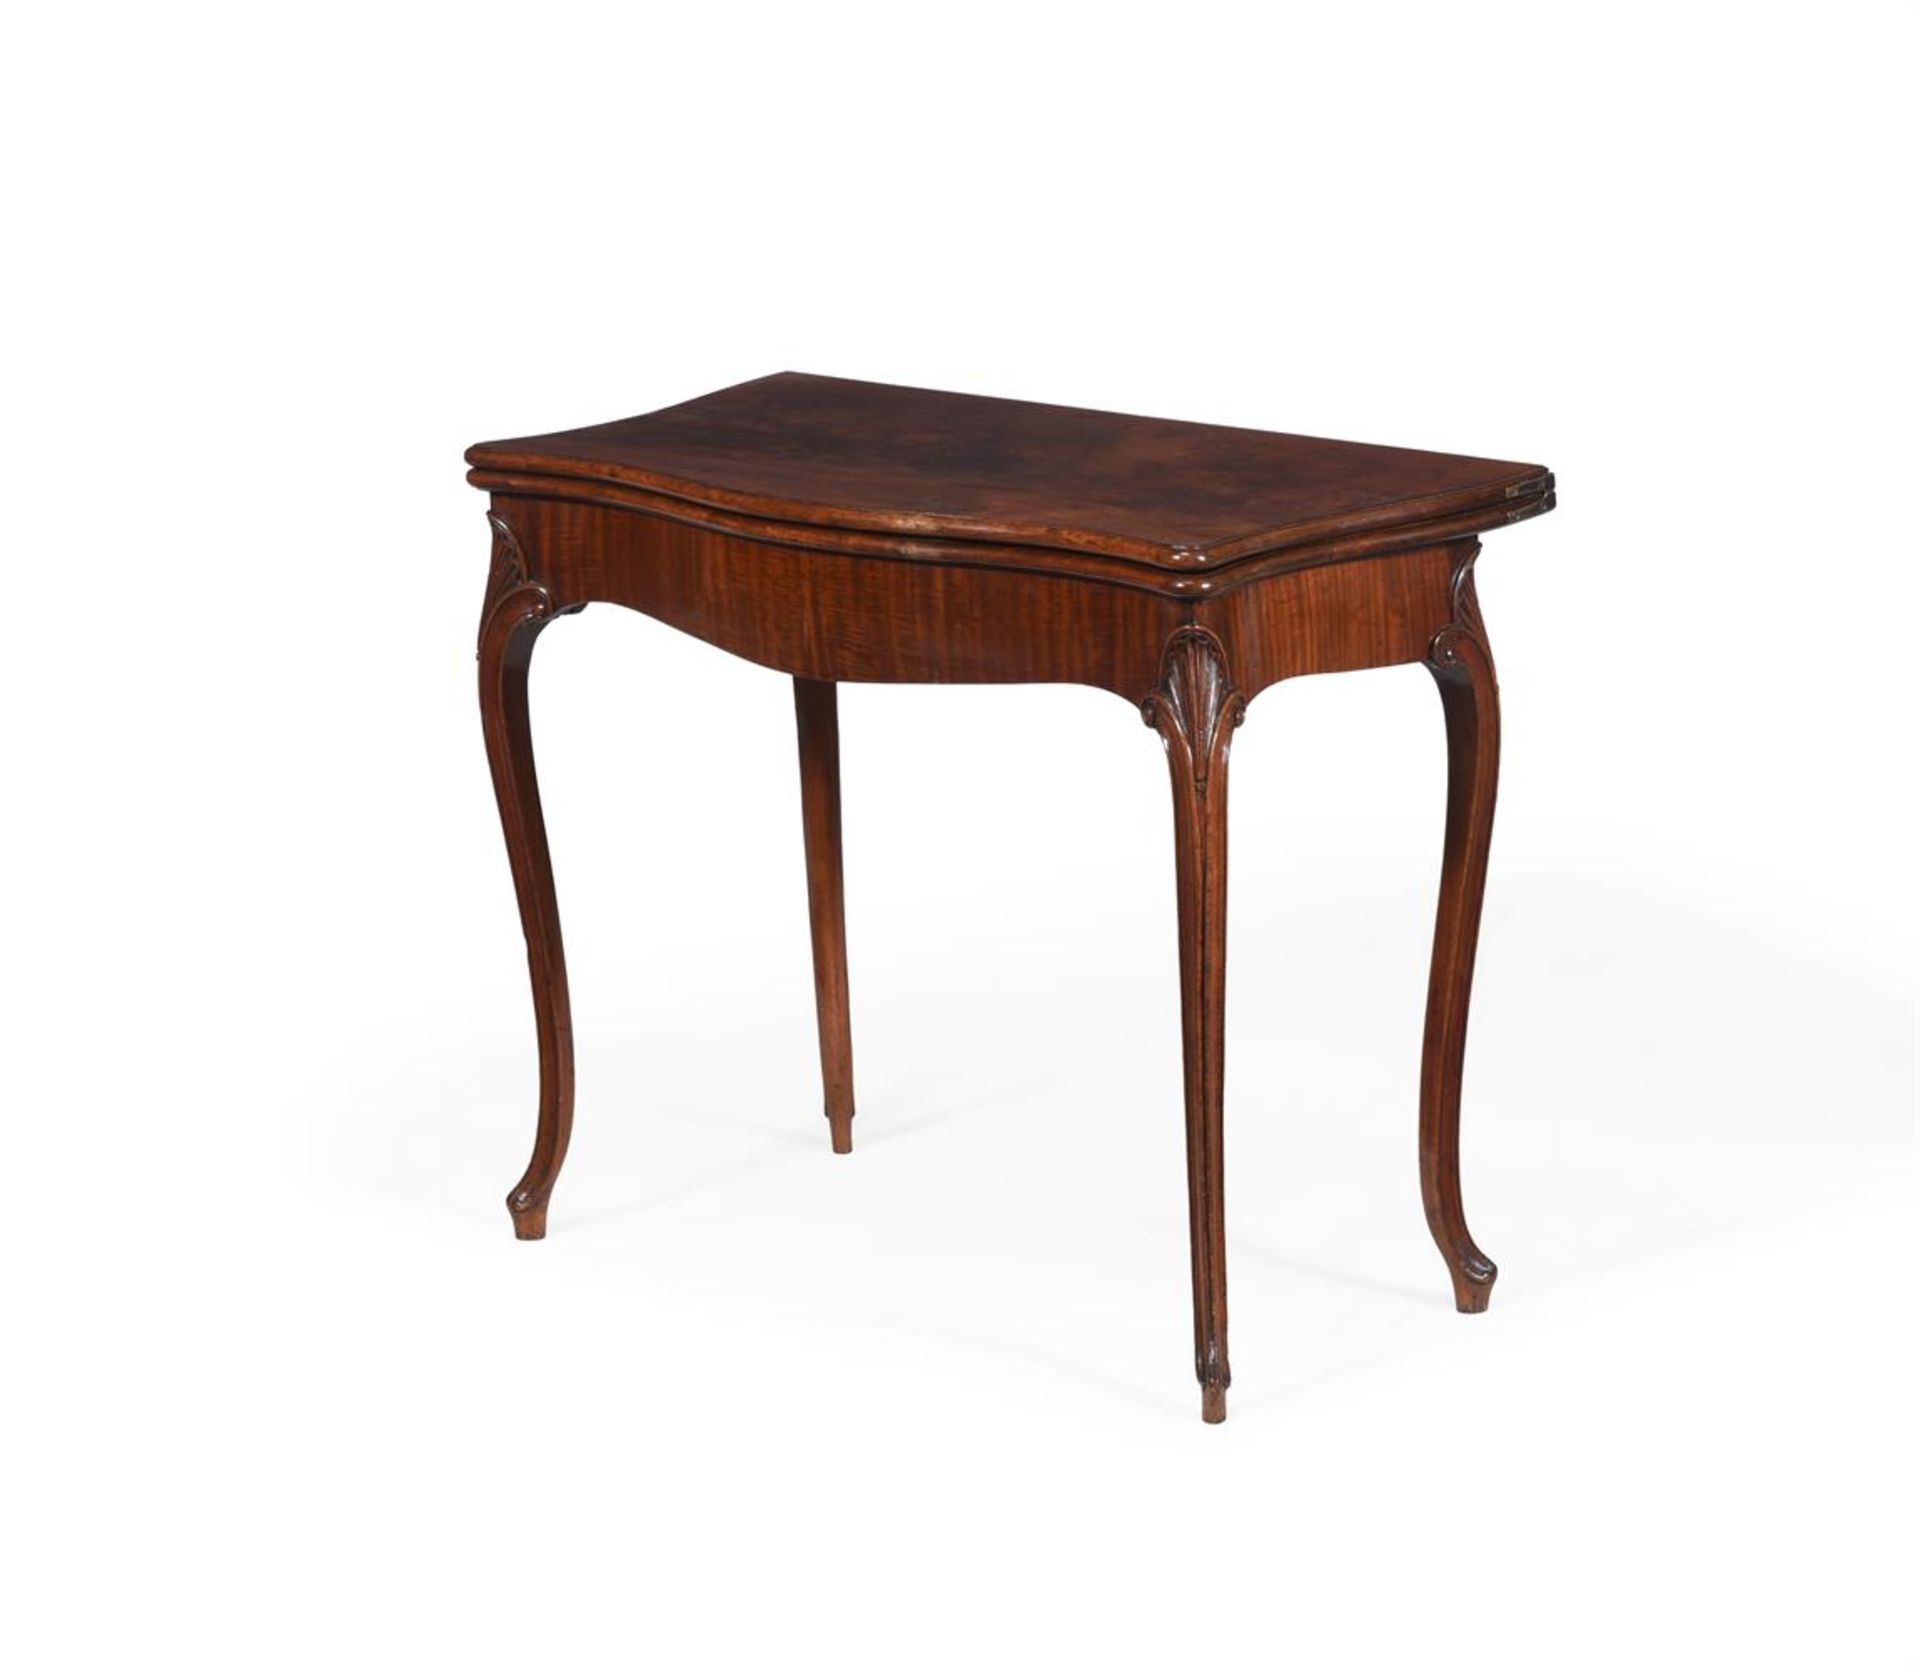 A CLOSELY MATCHED PAIR OF GEORGE III MAHOGANY AND INLAID TEA TABLES, CIRCA 1780 - Image 2 of 6